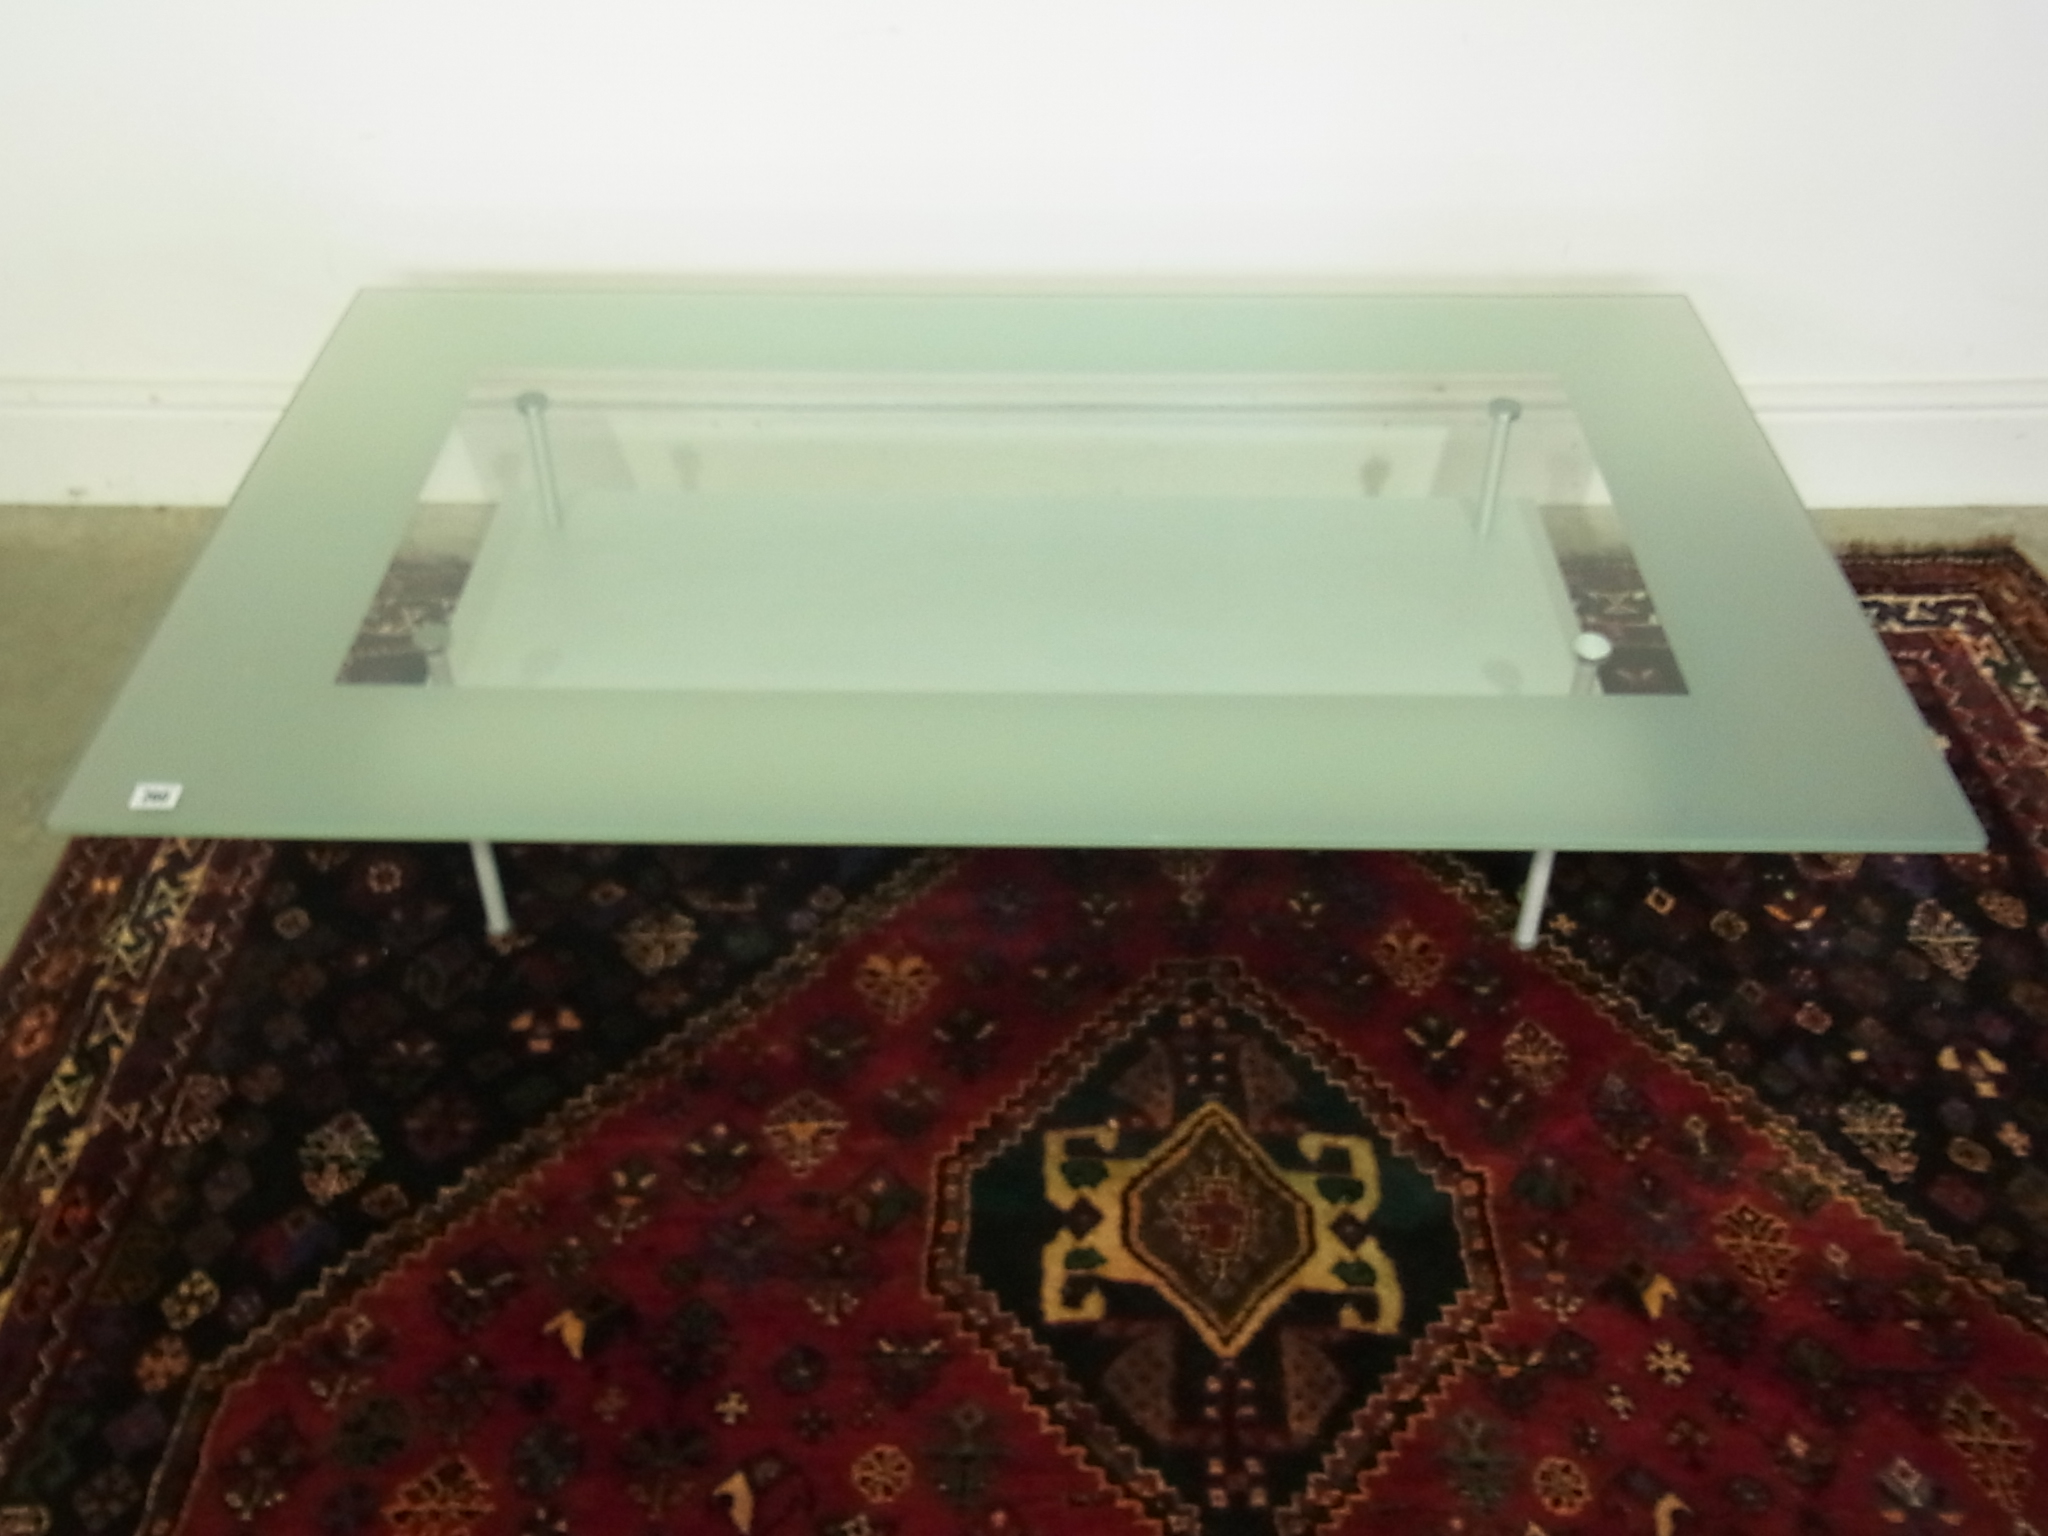 A CAILLERES glass coffee table - Height 30cm x 130cm x 80cm